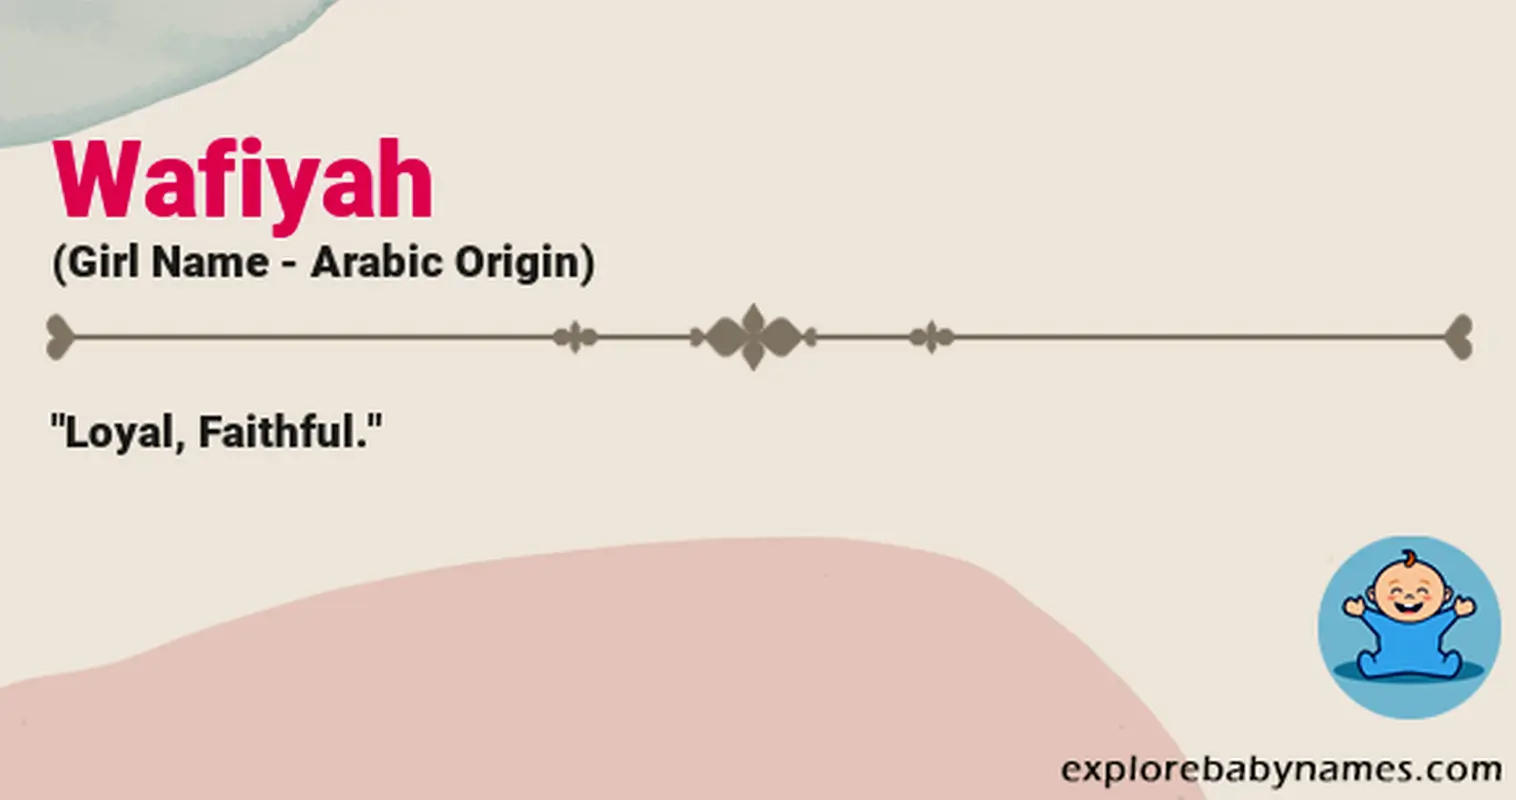 Meaning of Wafiyah